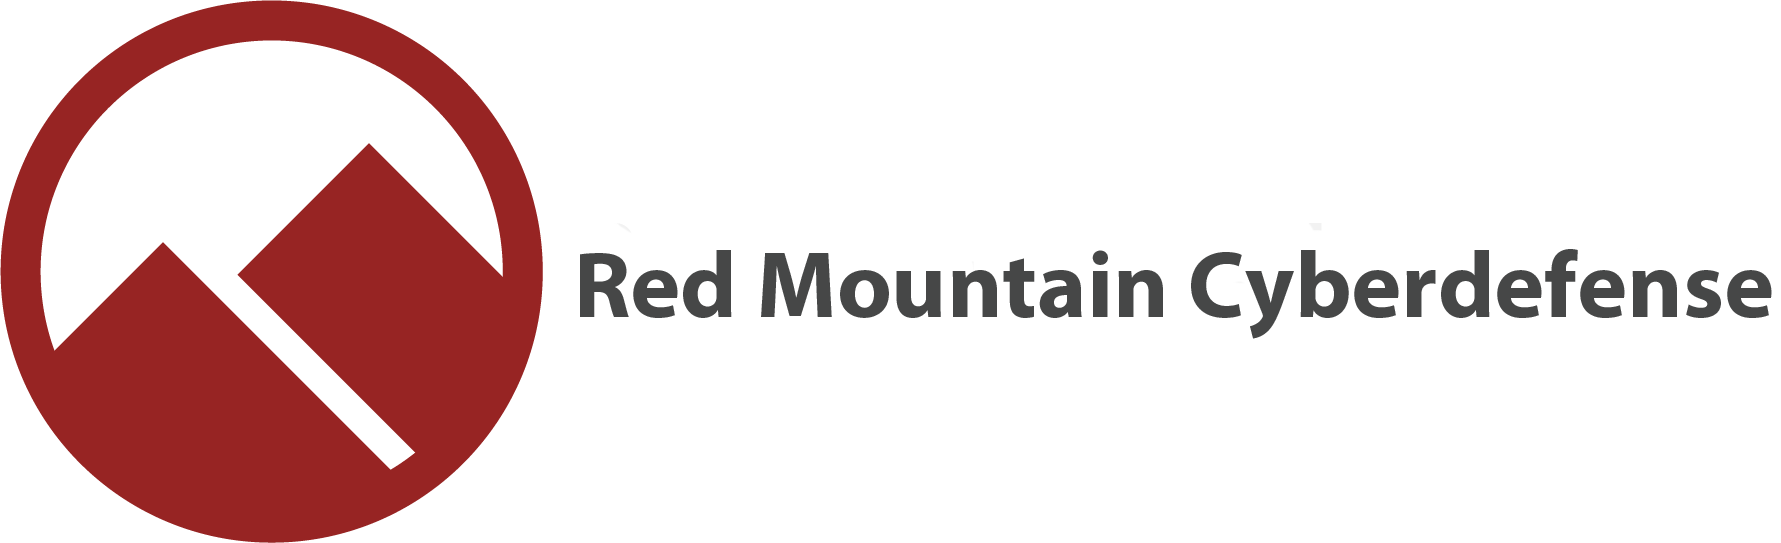 Red Mountian Logo - mobile security - Red Mountain Cyberdefense